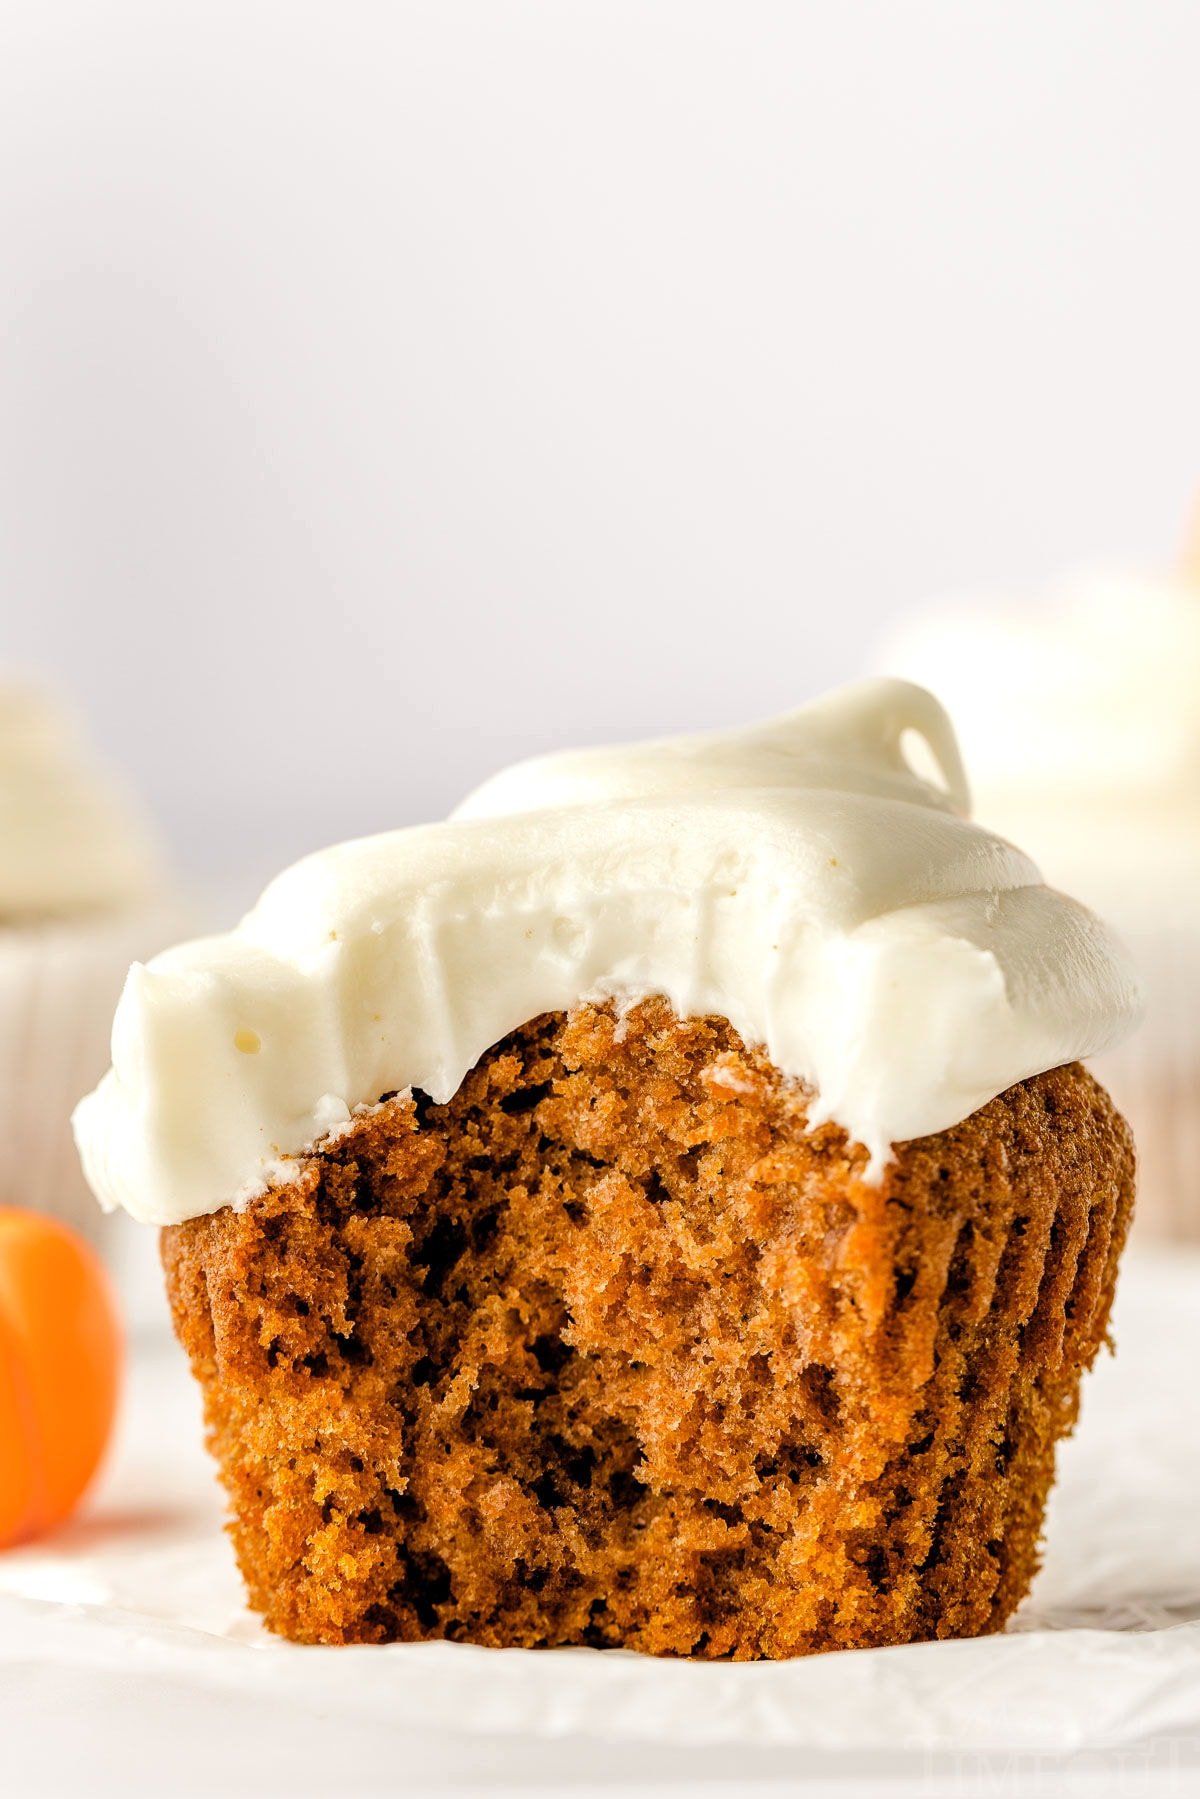 single pumpkin cupcake sitting on white cupcake liner frosted with cream cheese frosting. one large bite has been taken from the cupcake revealing a tender crumb.